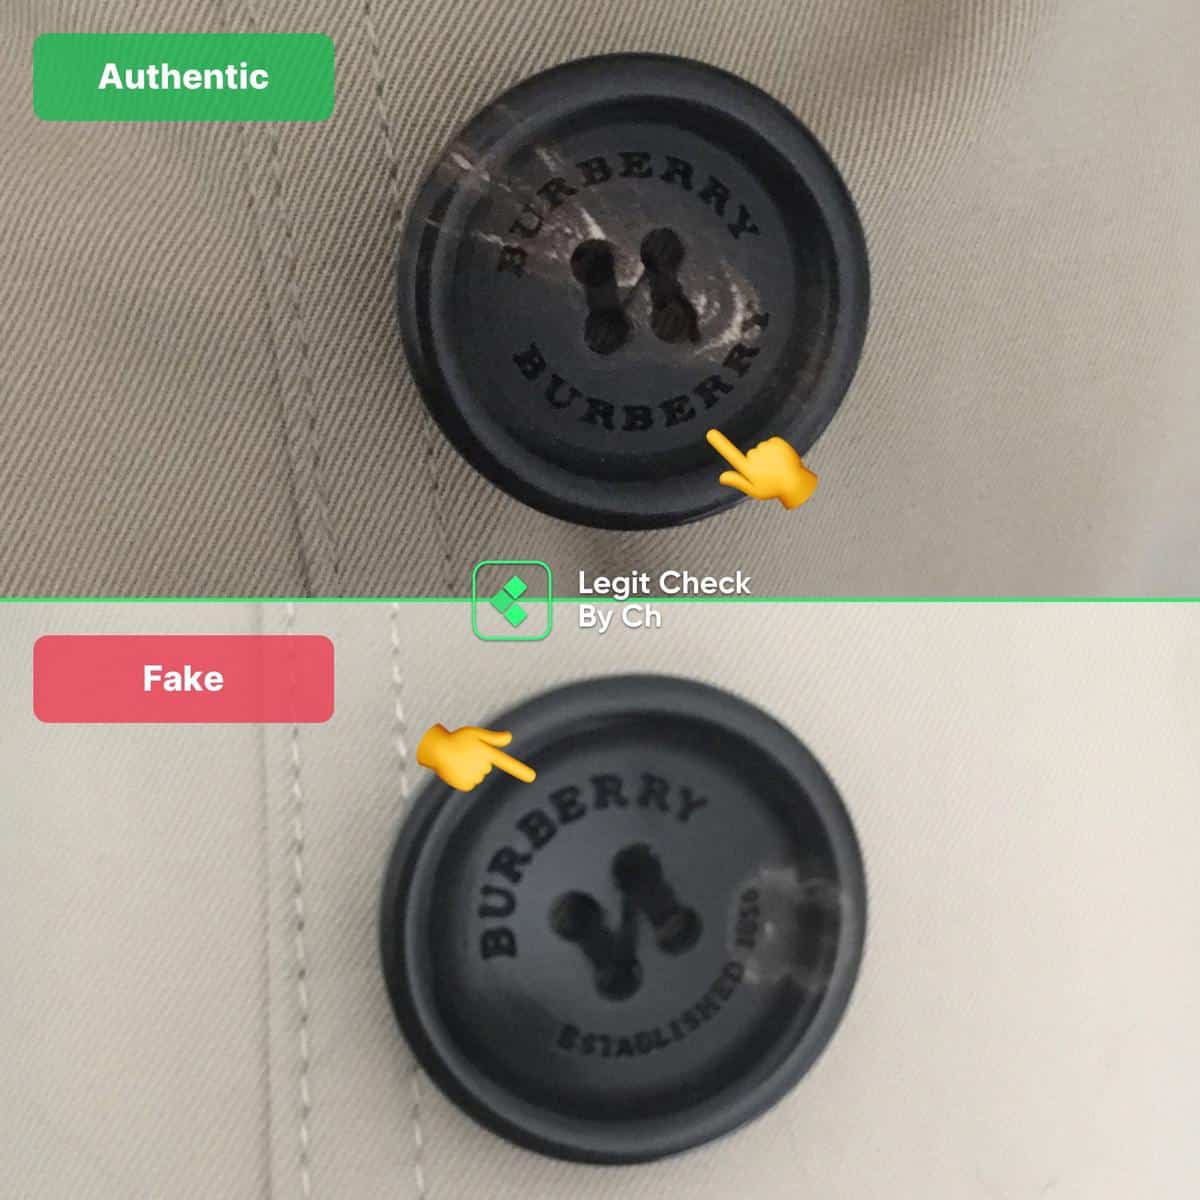 How to Spot a Fake Burberry Coat: 9 Steps (with Pictures)